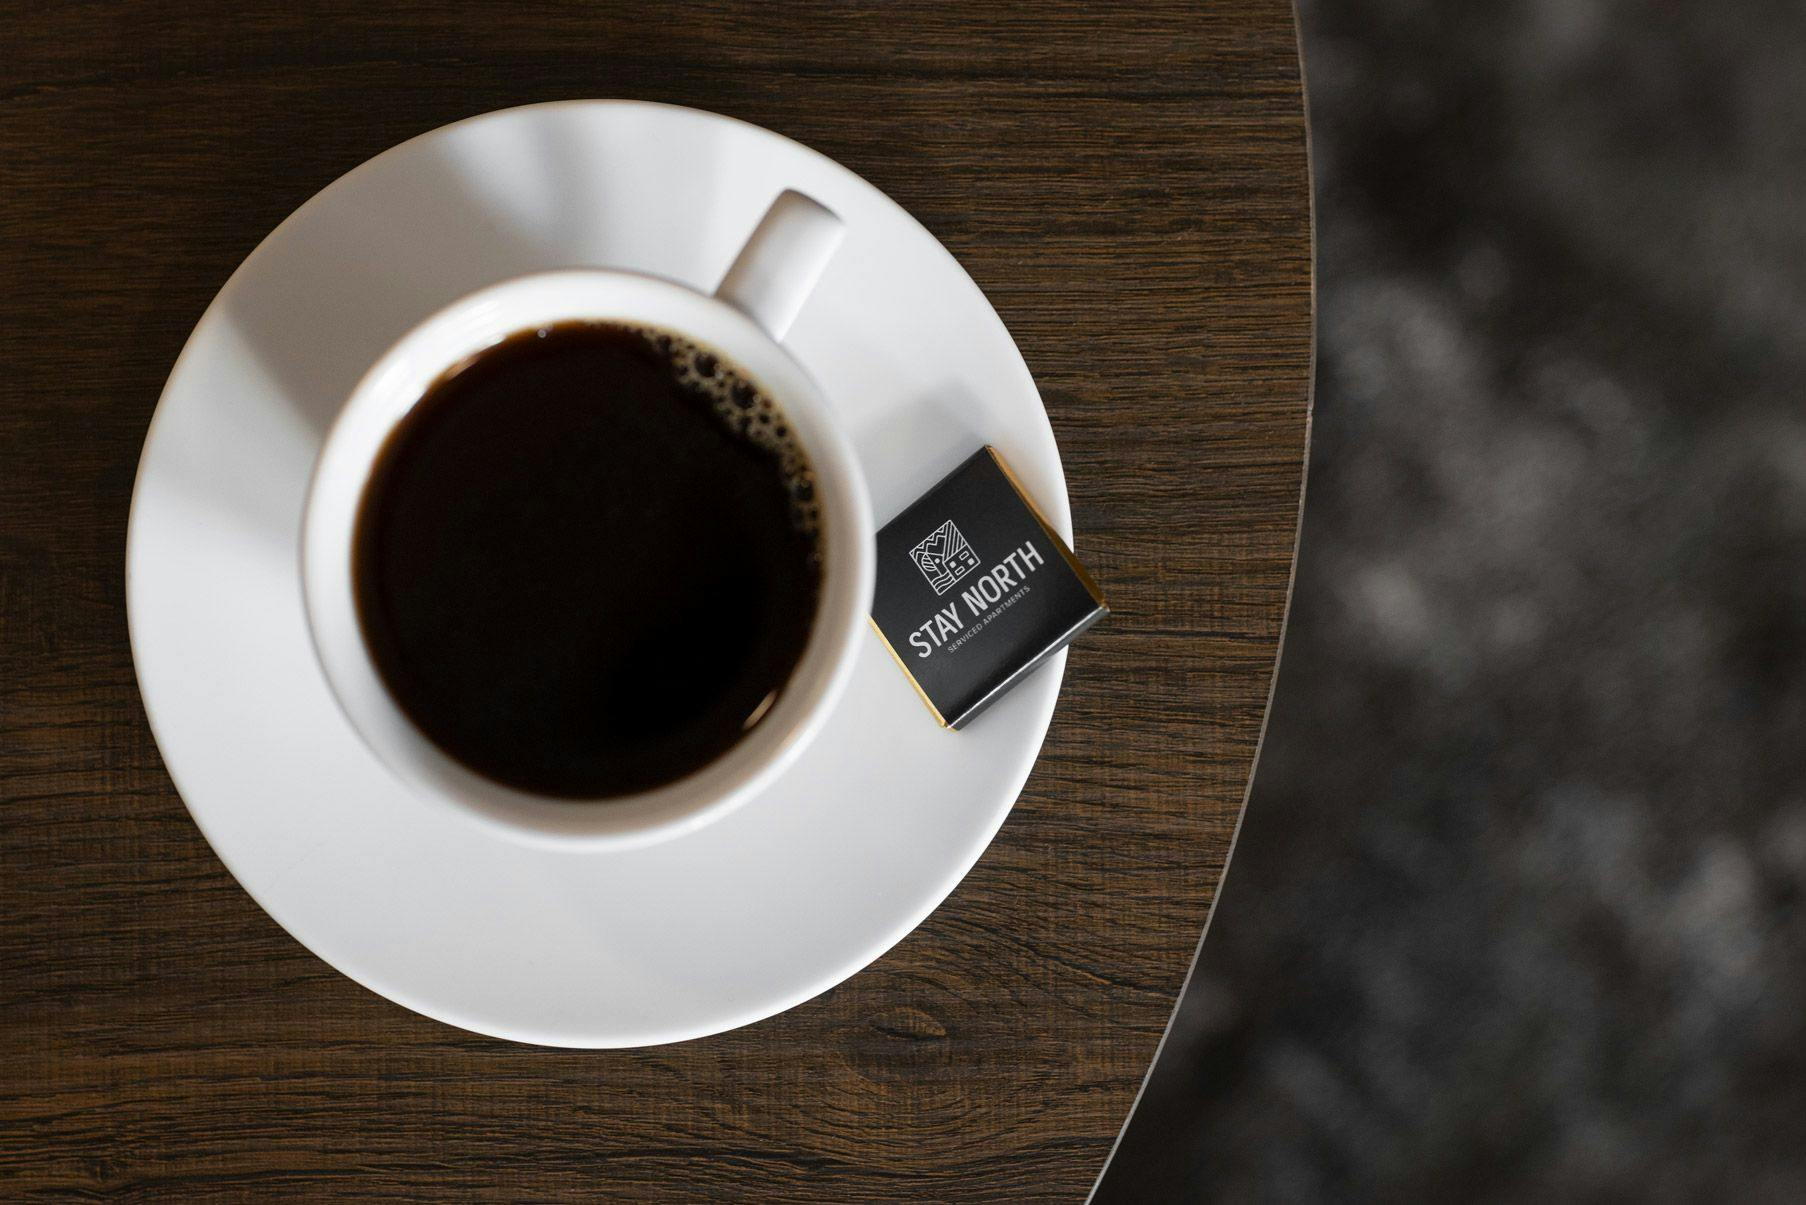 Photo: A cup of coffee with Stay North chocolate.